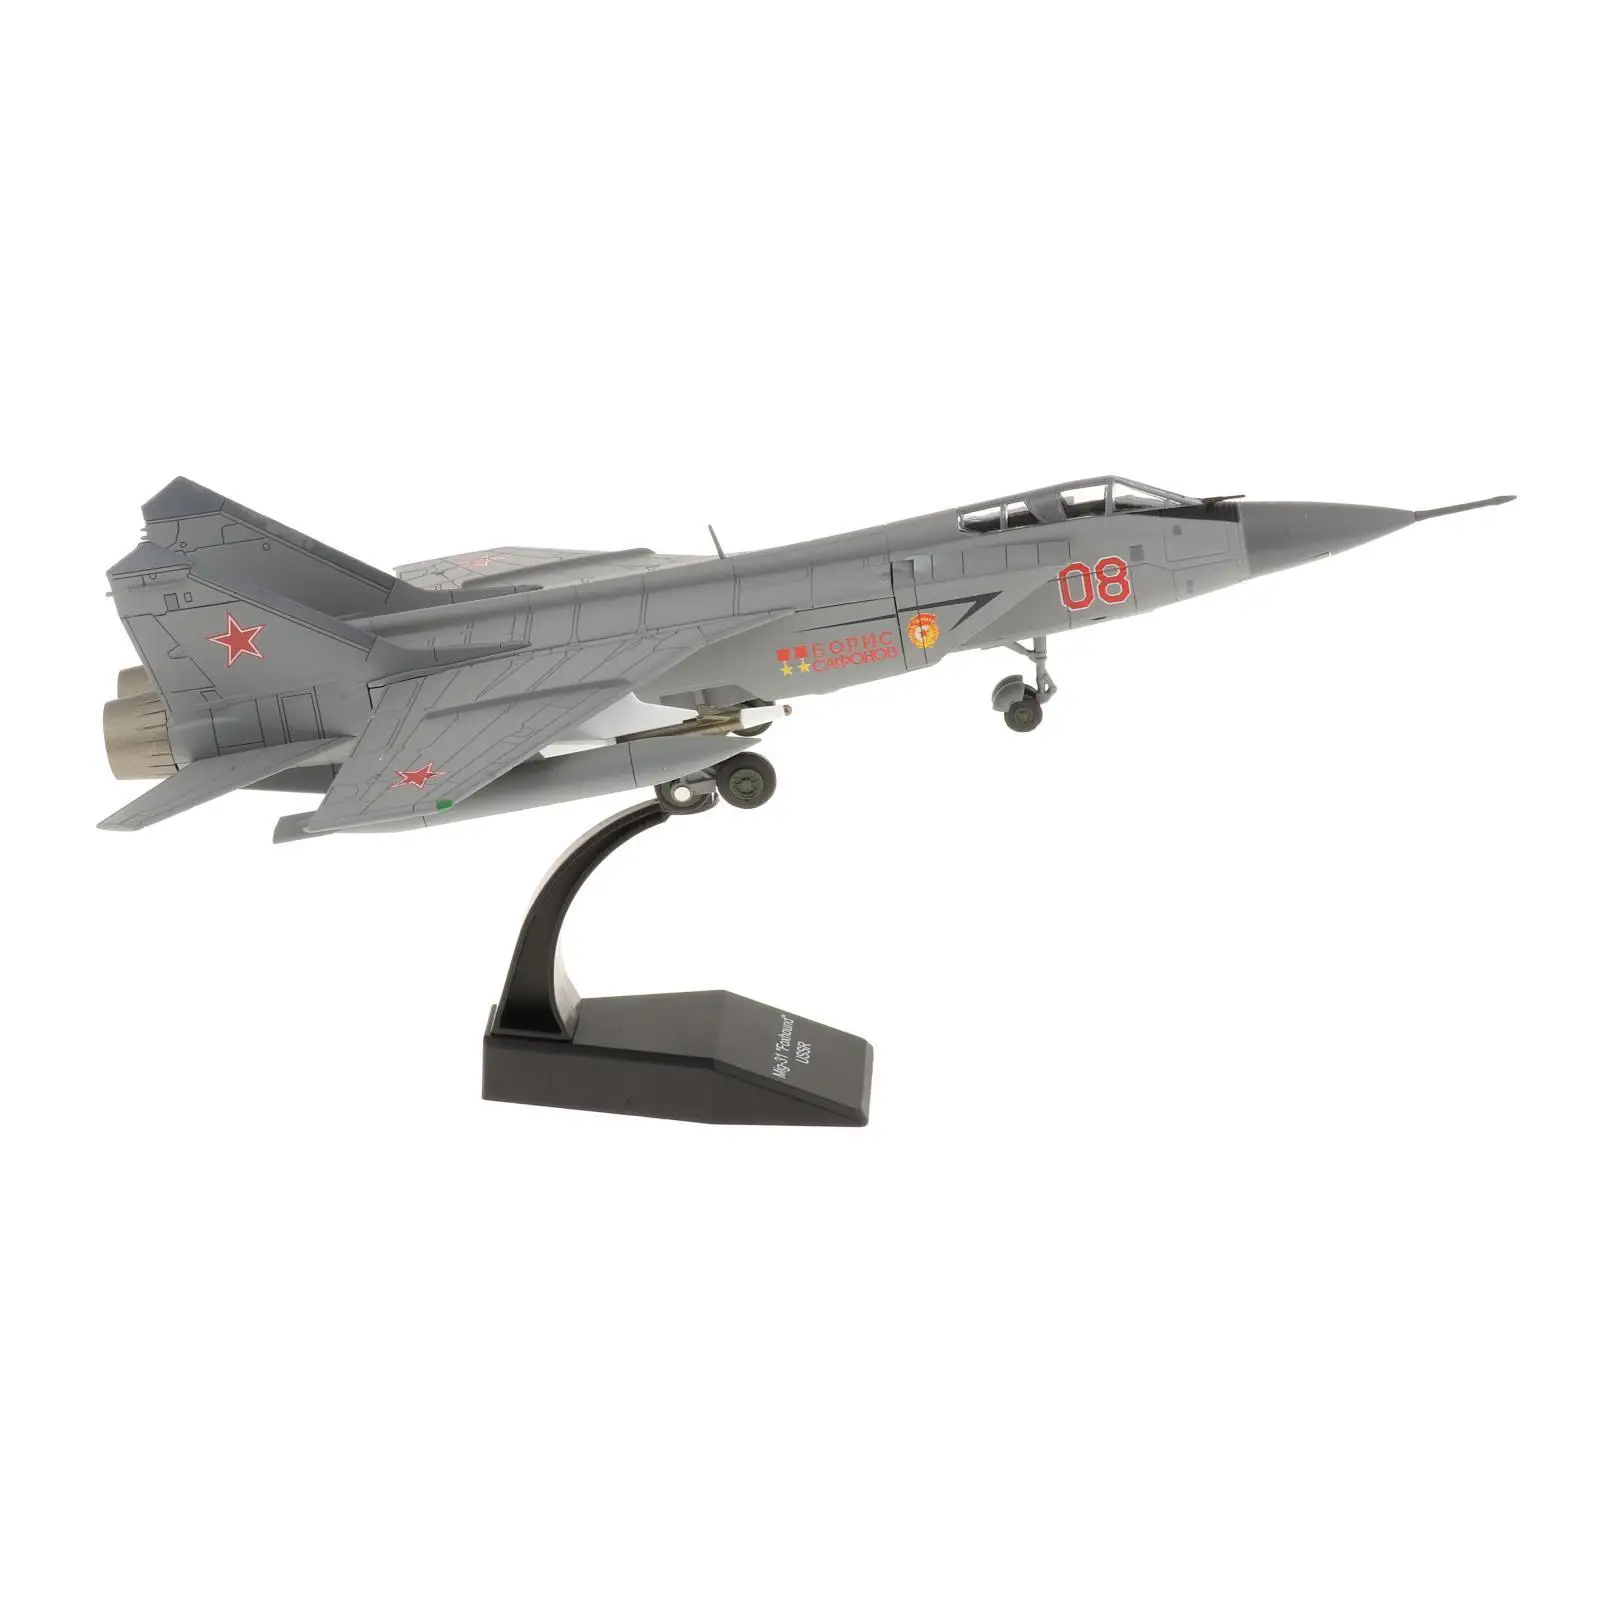 1:72th Mig-31 Model Airplane & Dispaly Stand Collectables Ornaments